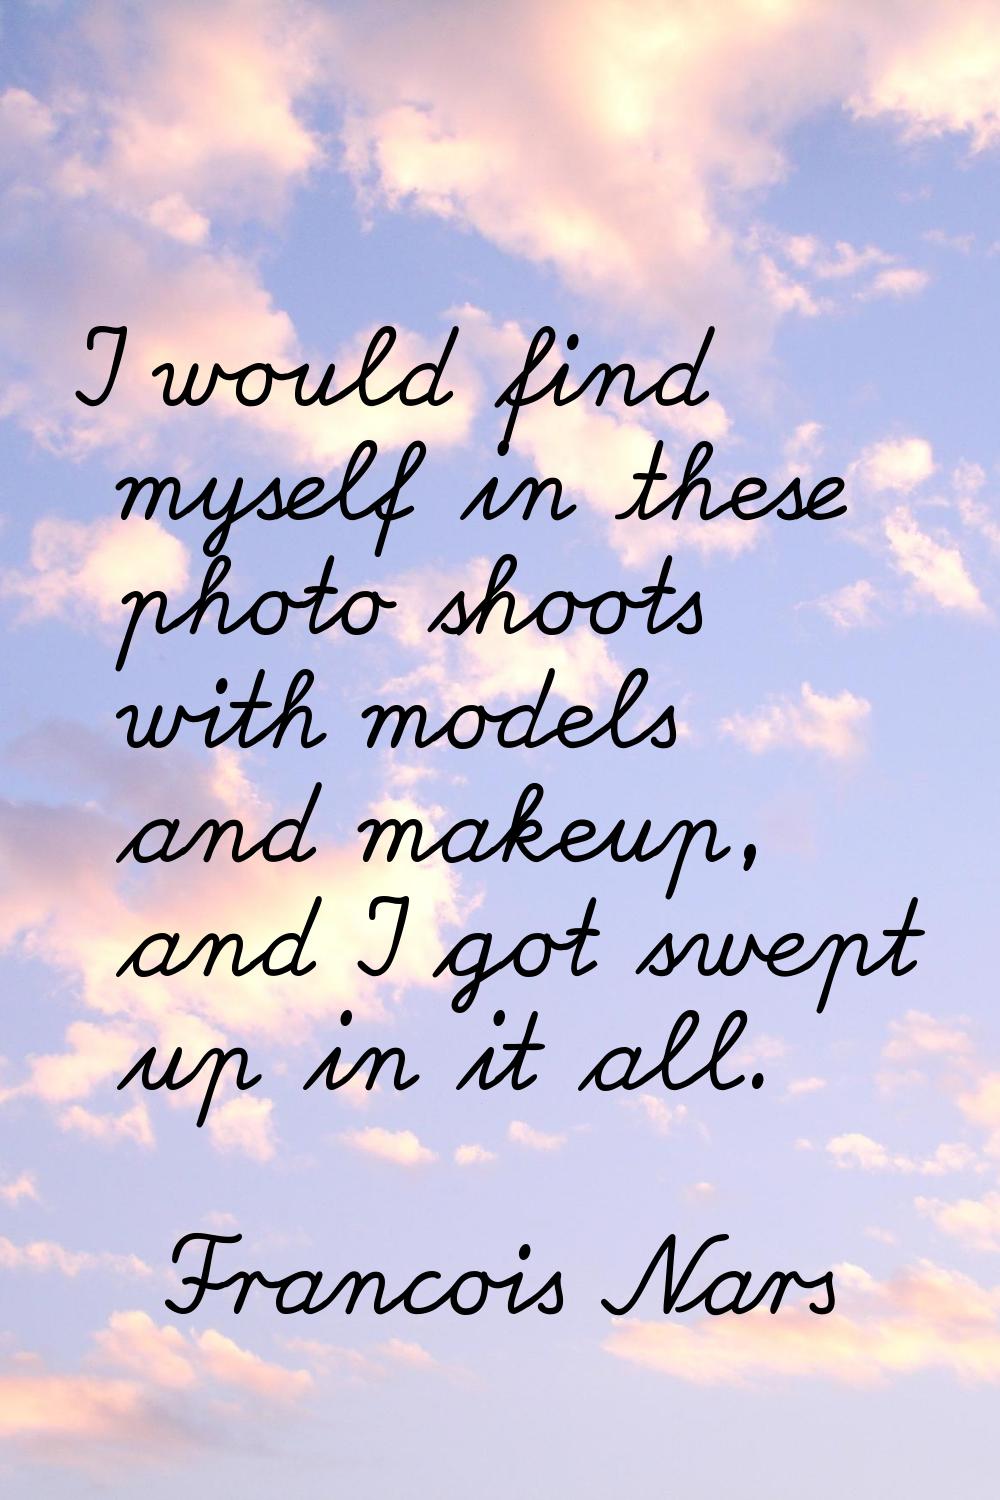 I would find myself in these photo shoots with models and makeup, and I got swept up in it all.